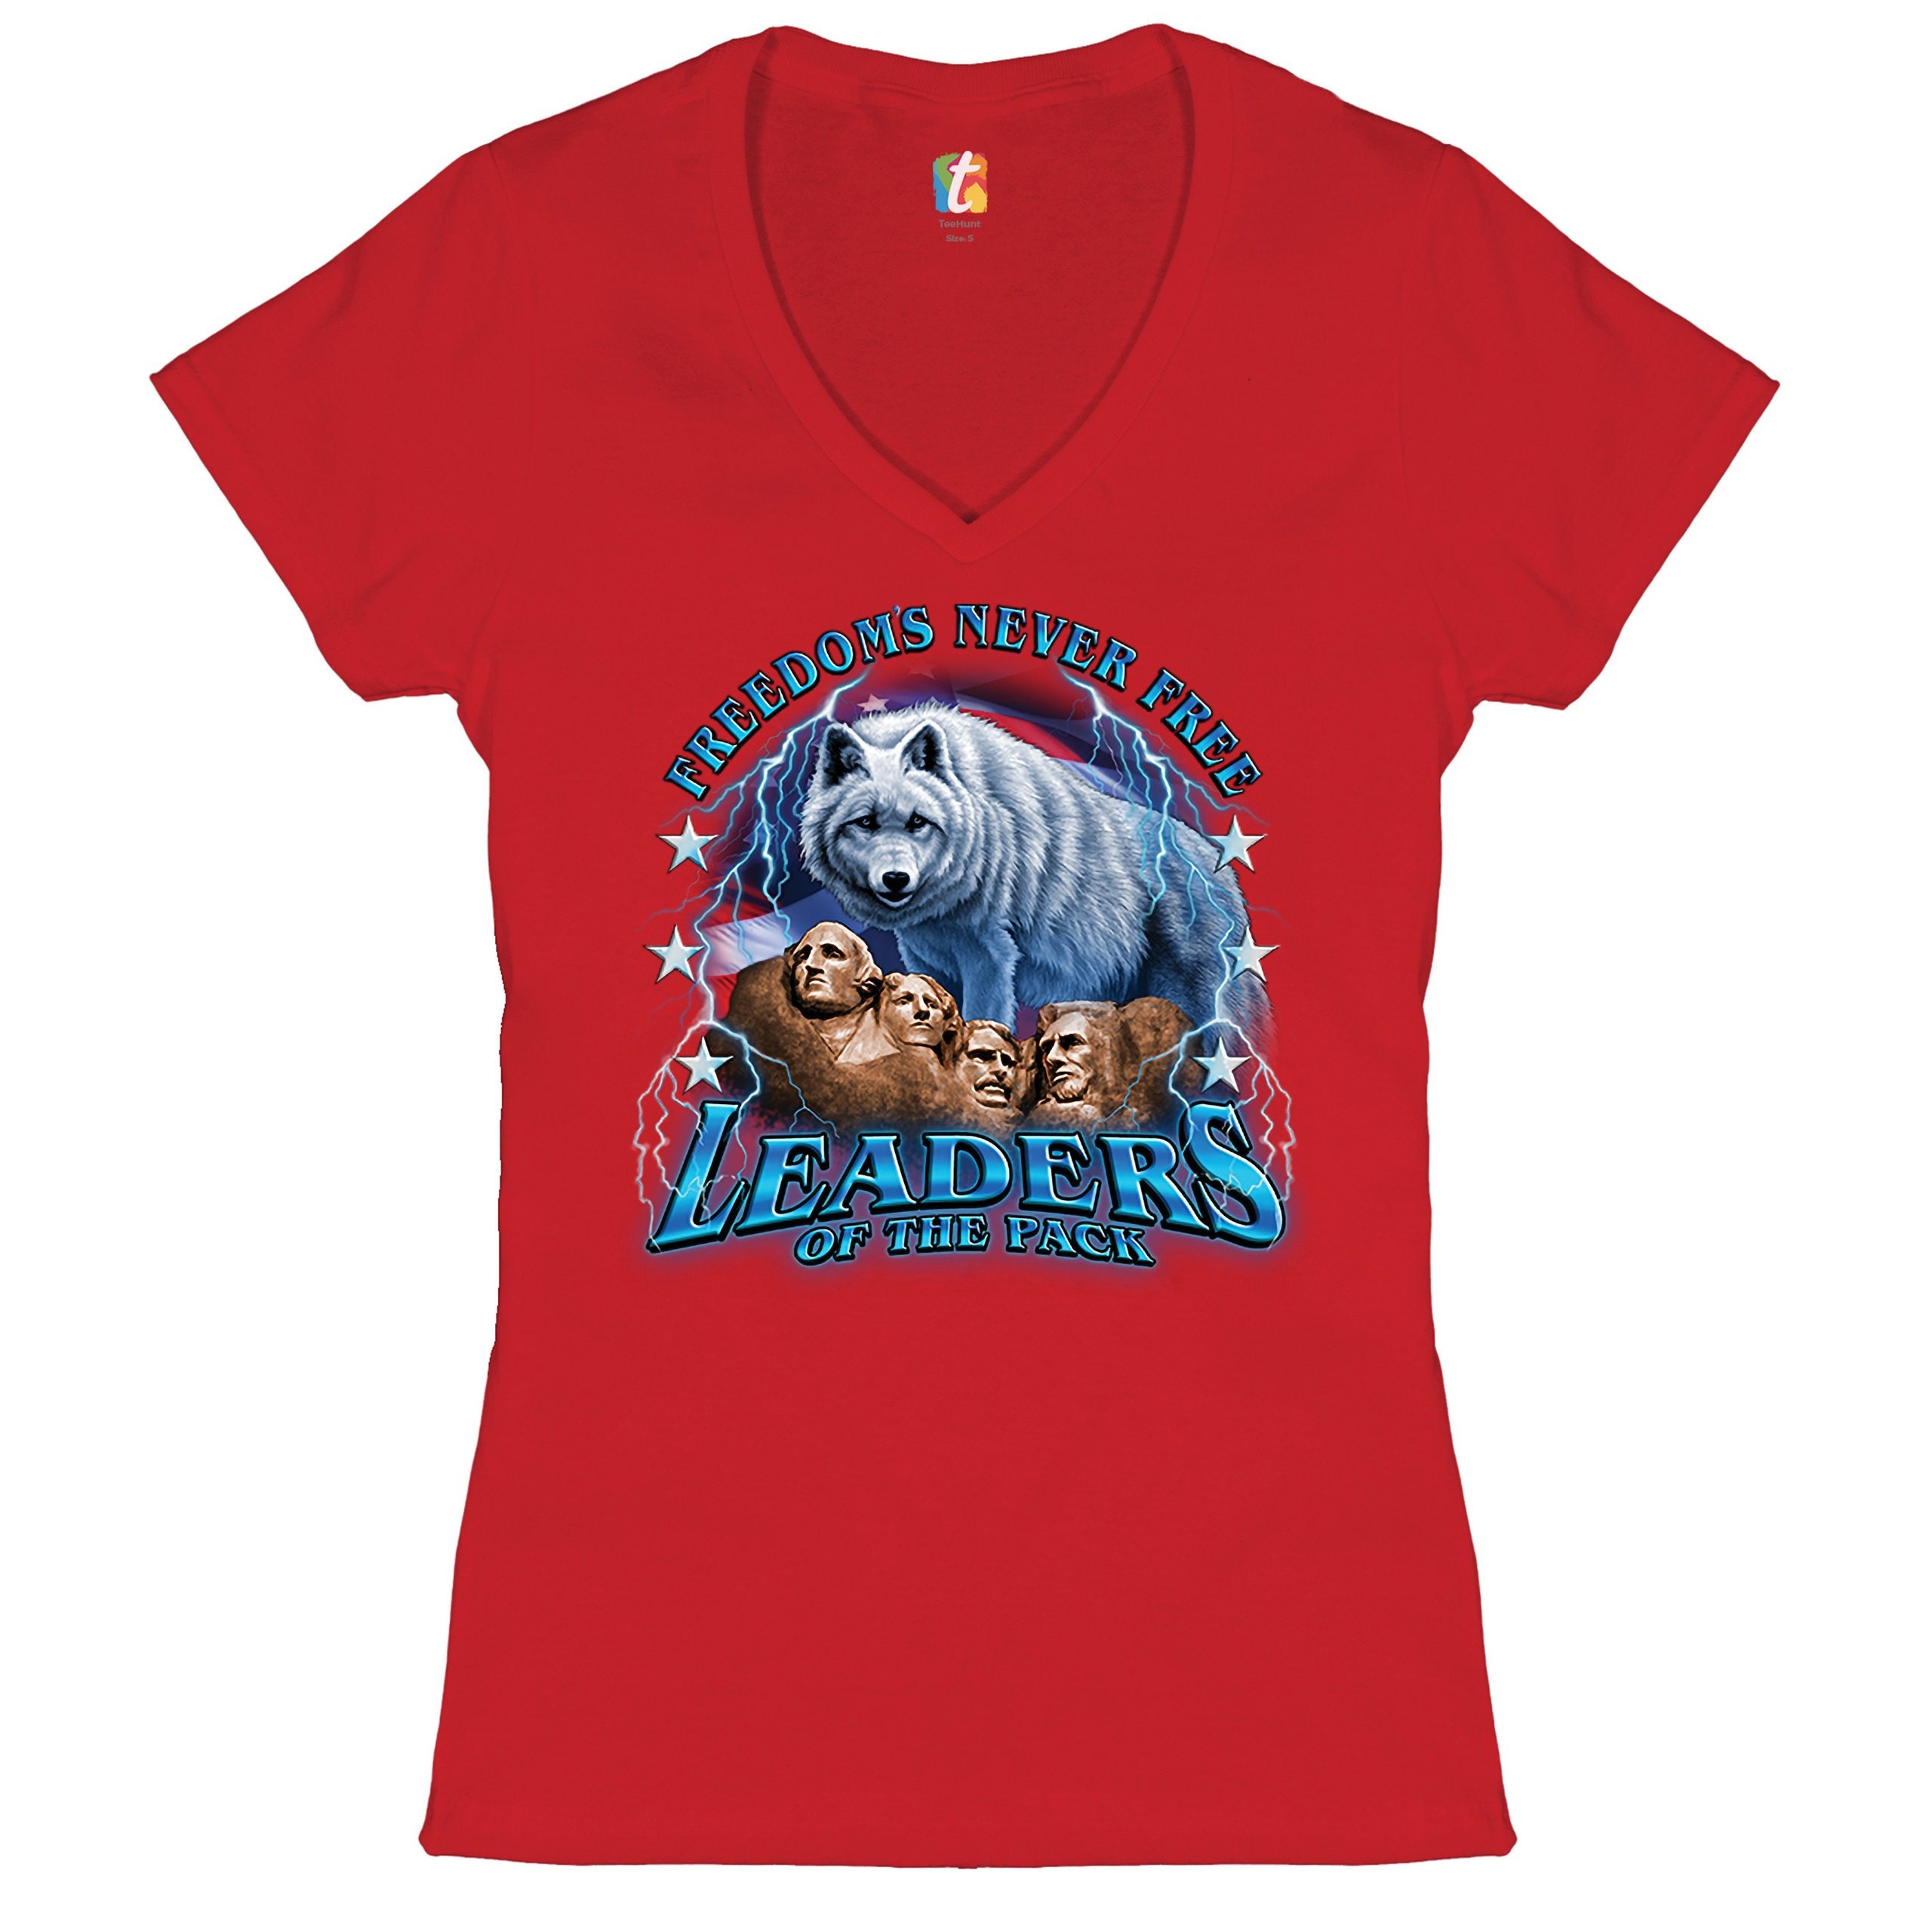 4th of July Tee Independence Day Leaders of the Pack Women's V-Neck T-shirt Freedom's Never Free Patriot American Flag Mount Rushmore